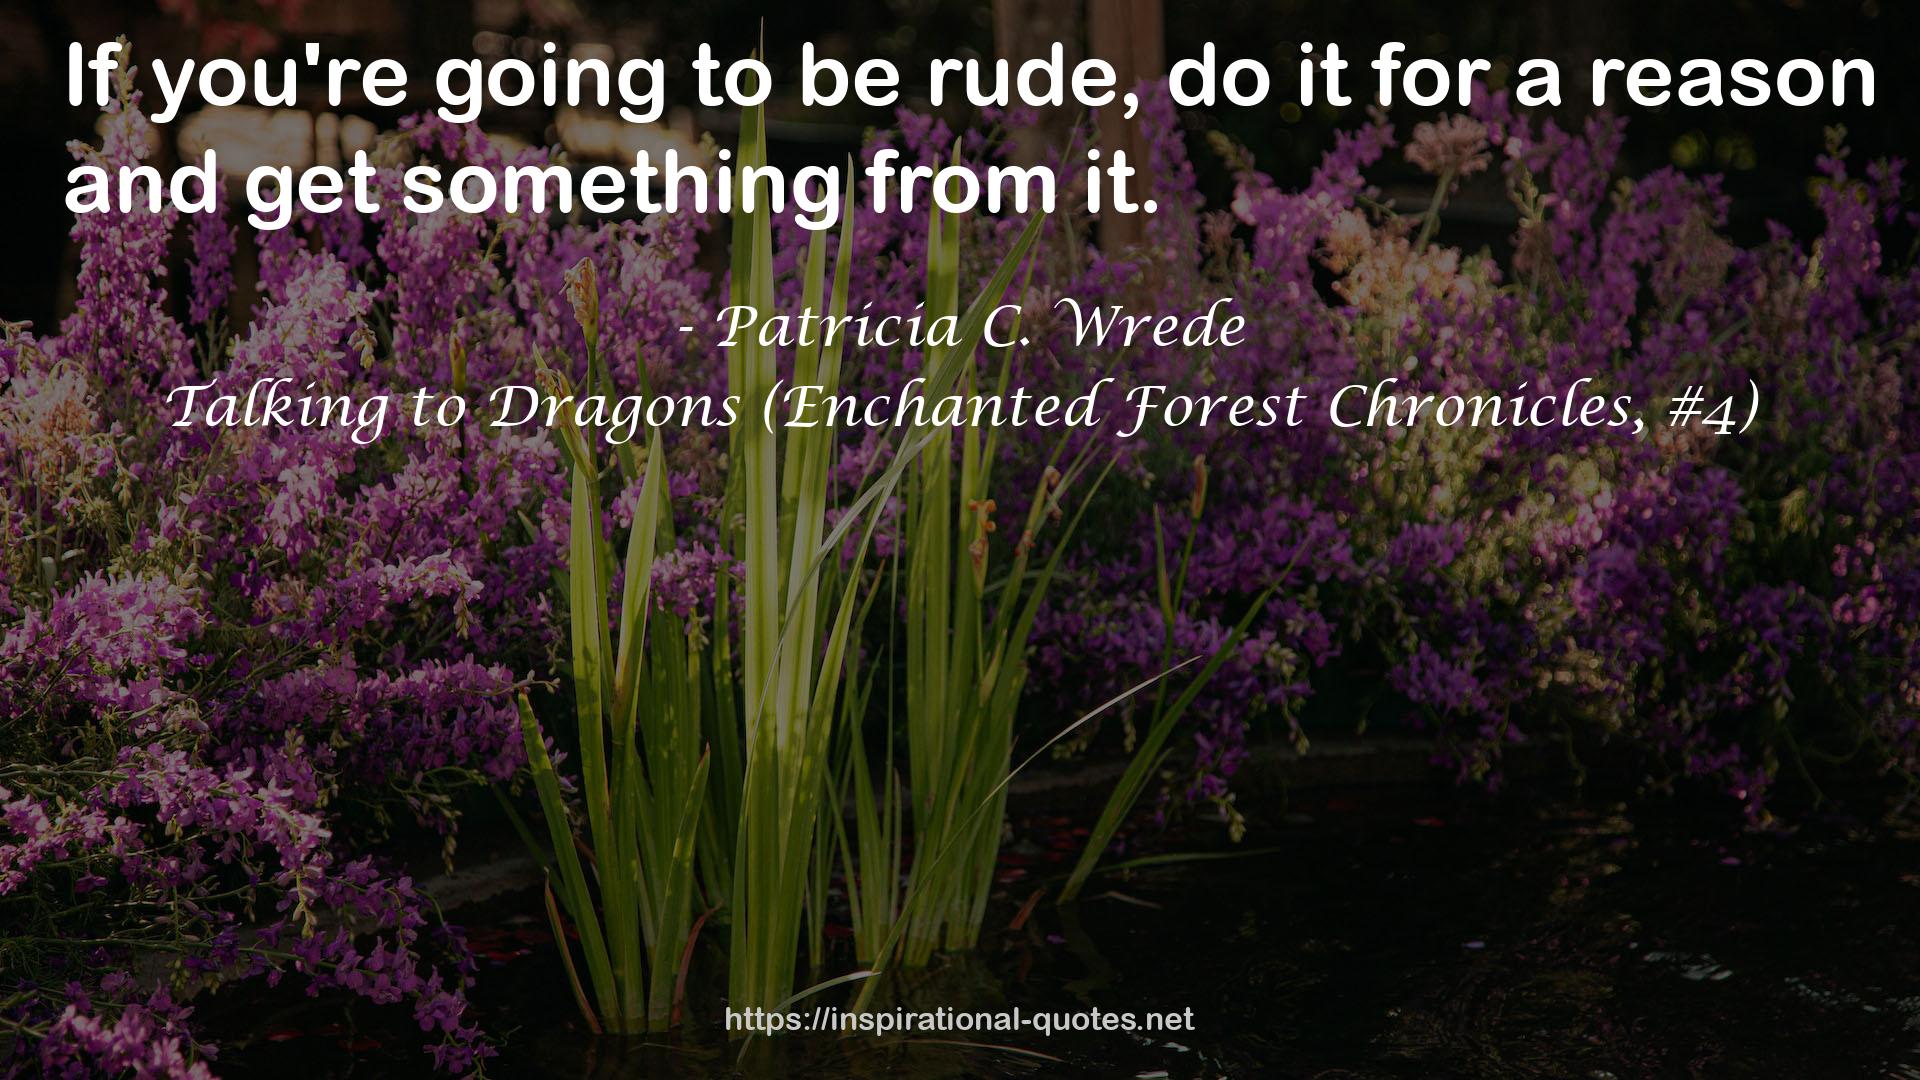 Talking to Dragons (Enchanted Forest Chronicles, #4) QUOTES